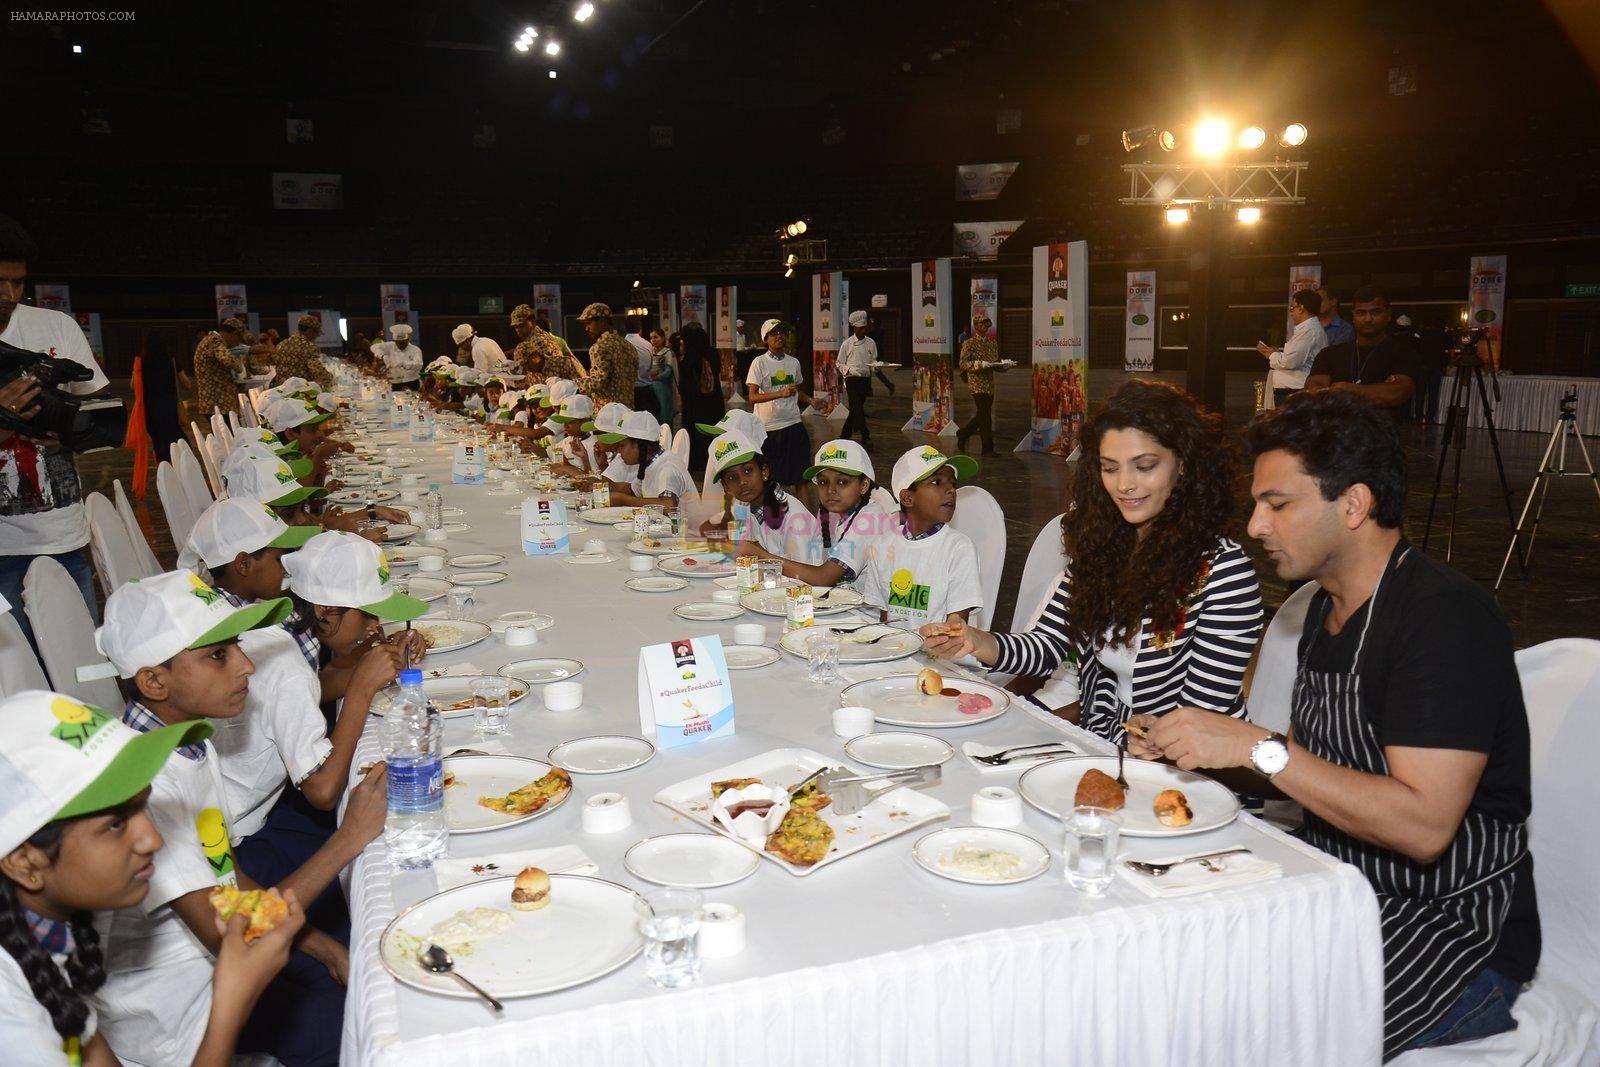 Saiyami Kher and Chef Vikas Khanna for world food day event by smile foundation at Quaker on 16th Oct 2016